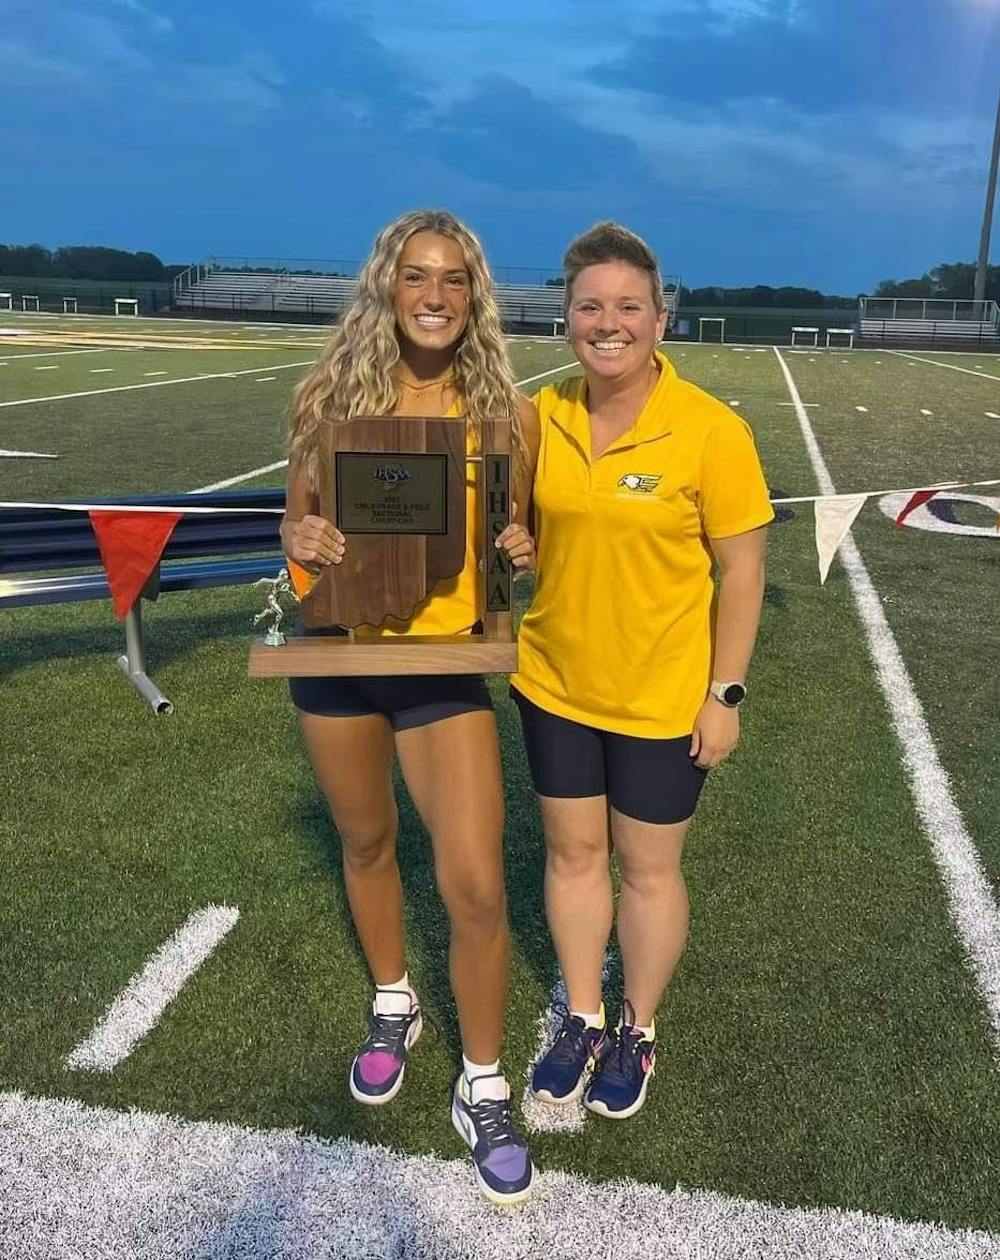 Delta senior Kendra Keesling stands with Delta Track and Field head coach Mackenzie Dye Conley after winning sectionals May 16 at Delta High School. Photo Provided by Mackenzie Dye Conley.